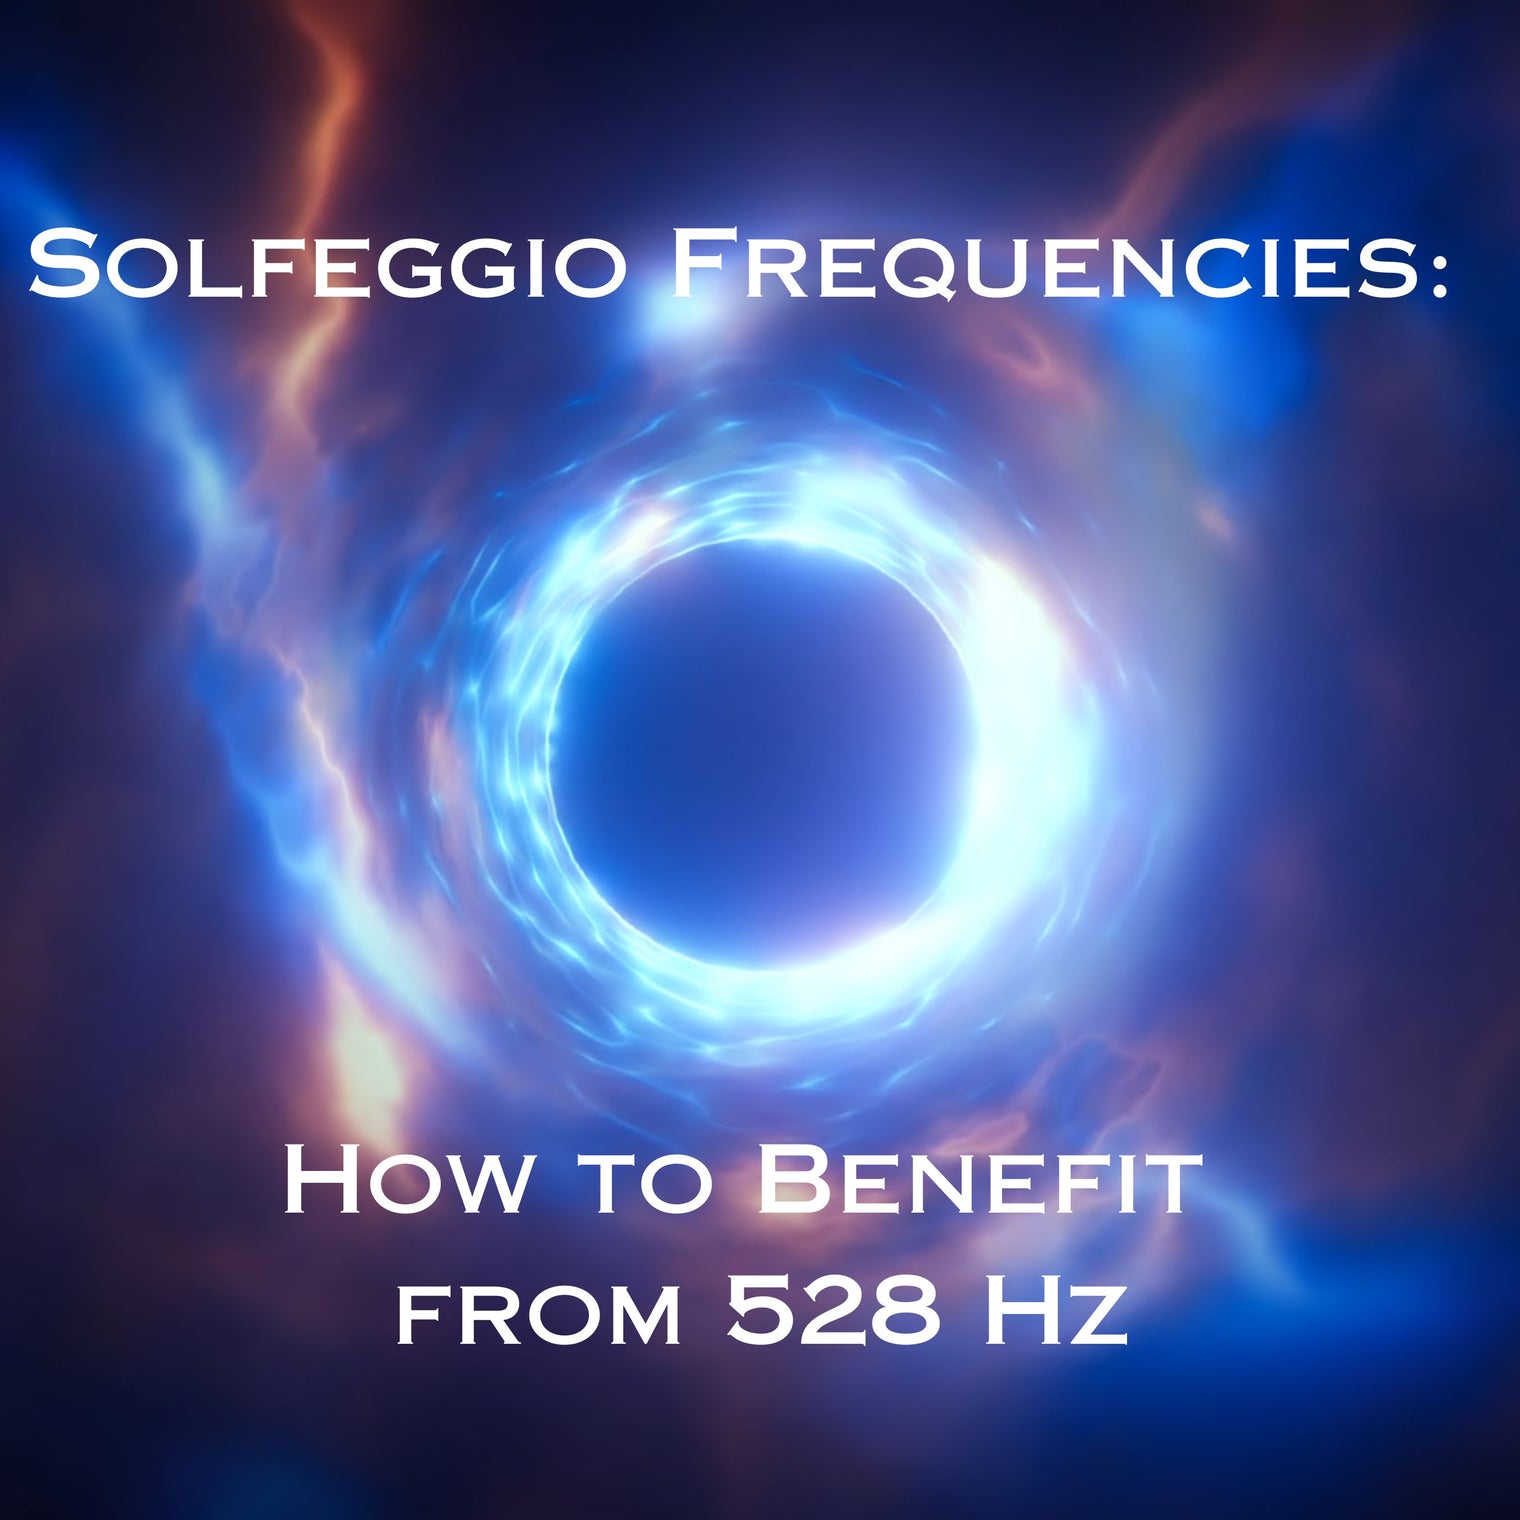 Solfeggio Frequencies: How to Benefit from 528 Hz